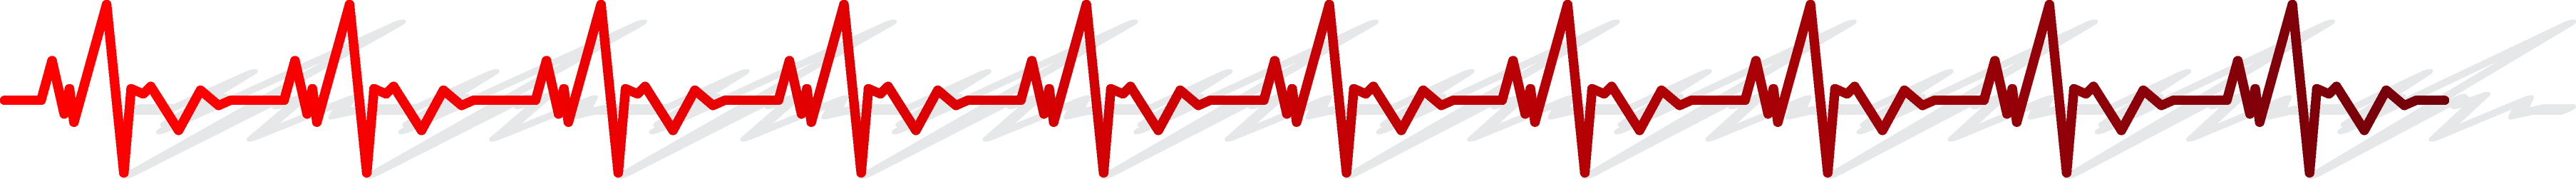 Heartbeat Clipart - The Cliparts